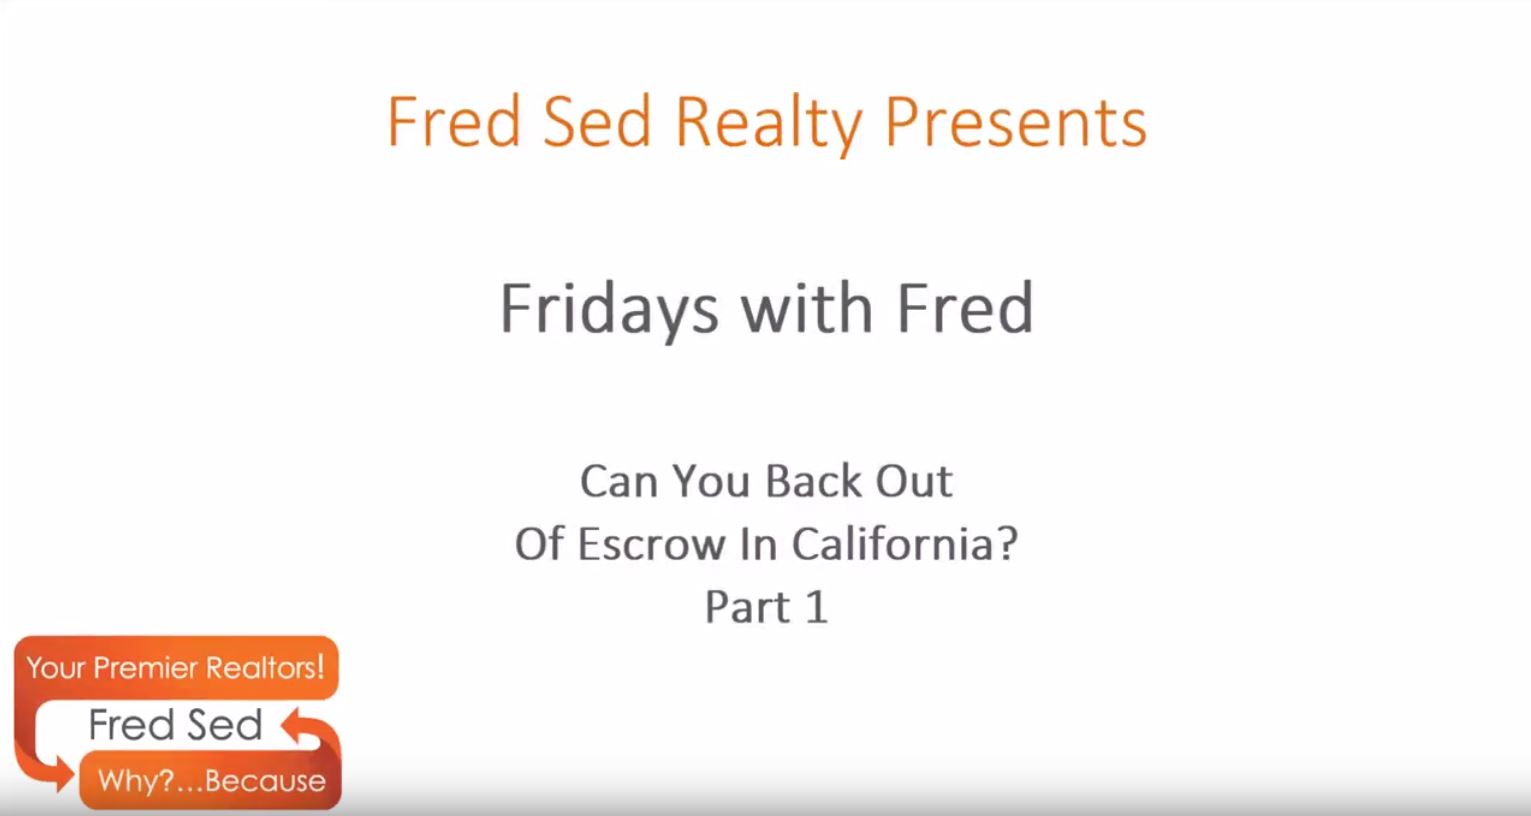 Can_you_back_out_of_escrow_in_california_pt_1_Fridays_with_Fred.JPG